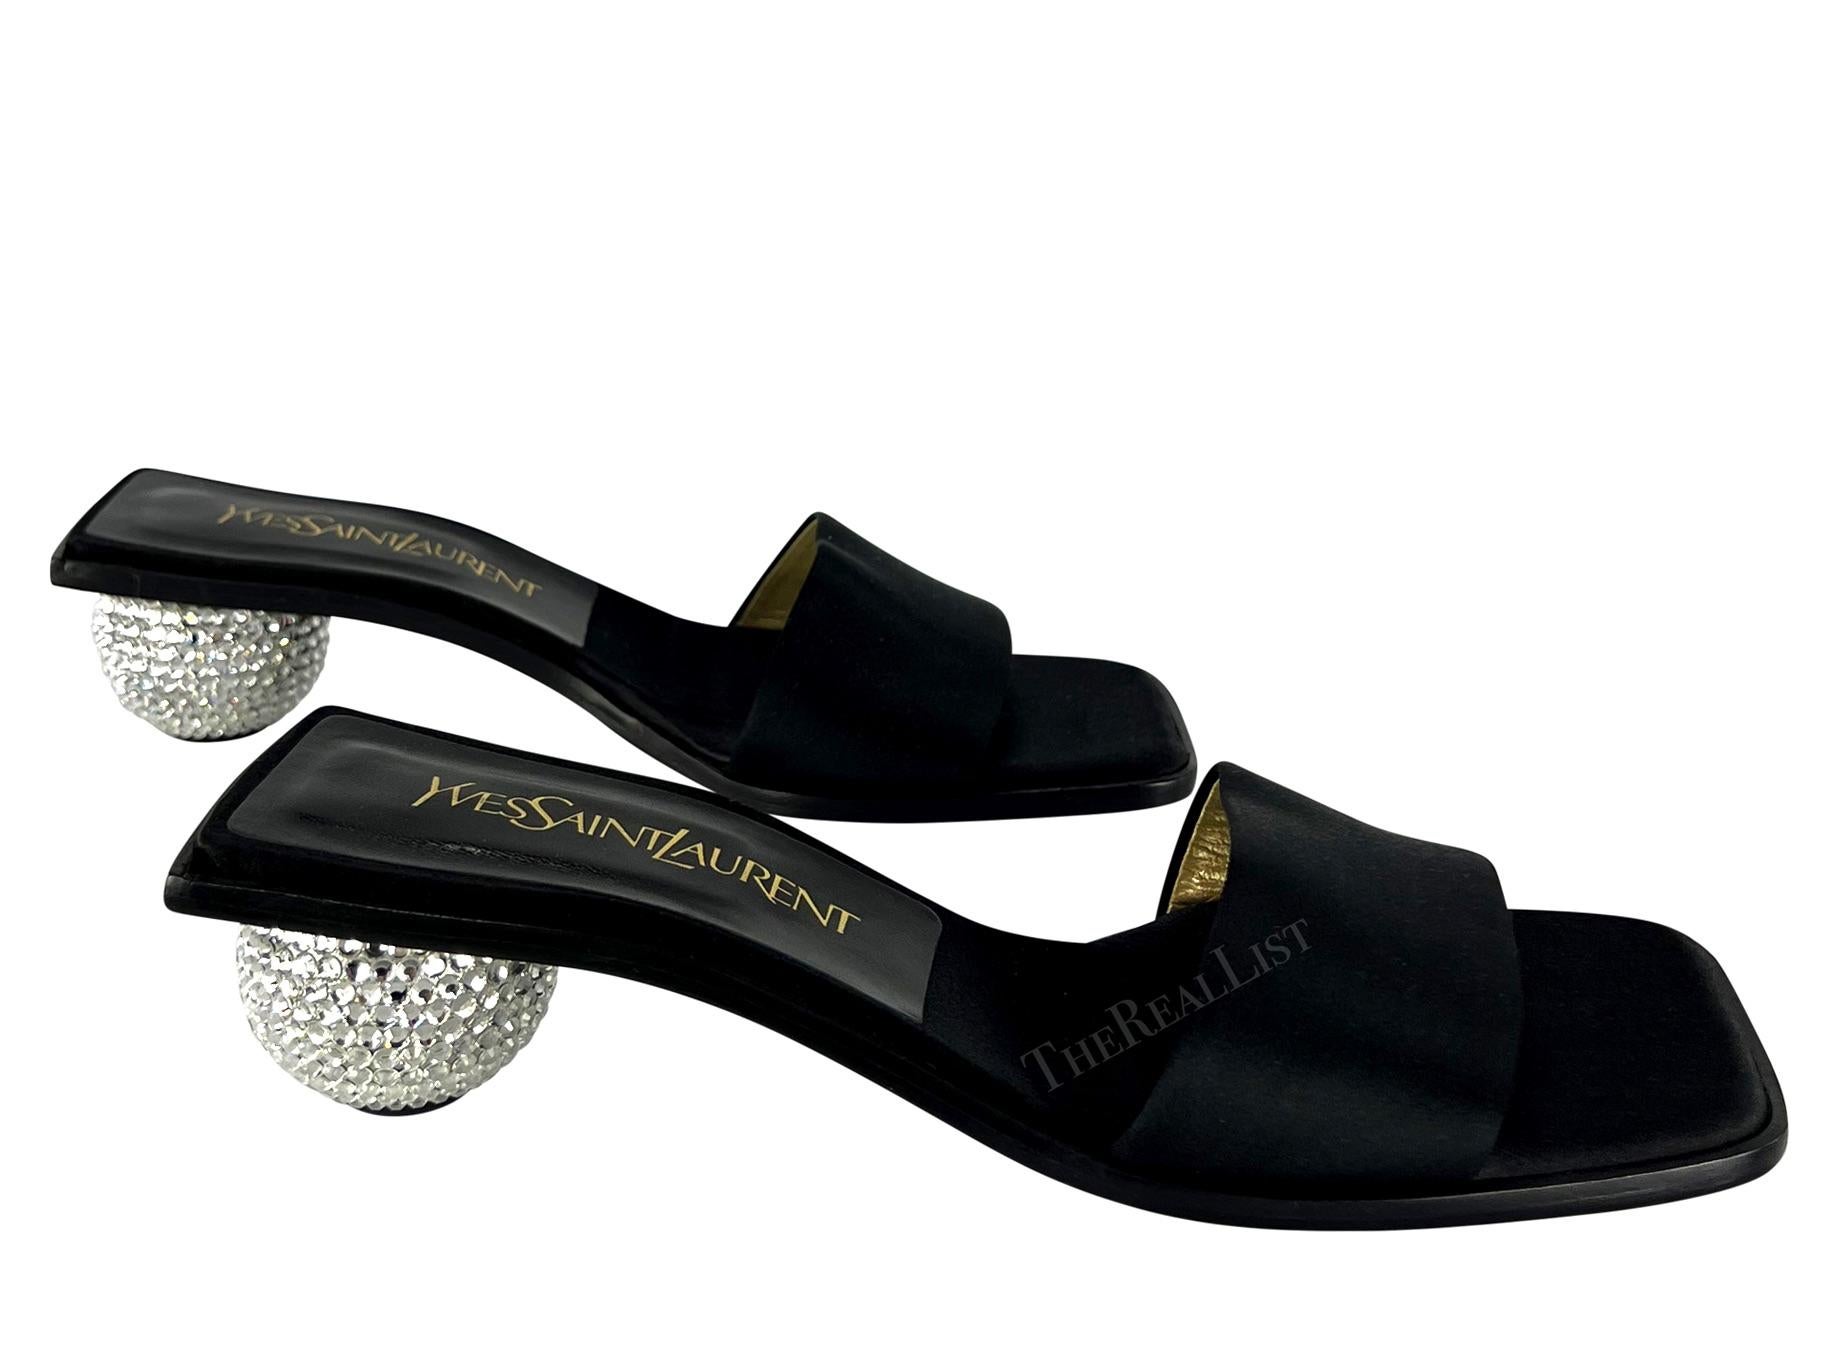 Presenting a pair of black satin Yves Saint Laurent heeled sandals. From the early 1990s, these chic never worn before sandals are amped up with round rhinestone embellished heels. Add these rare disco ball Yves Saint Laurent sandals to your